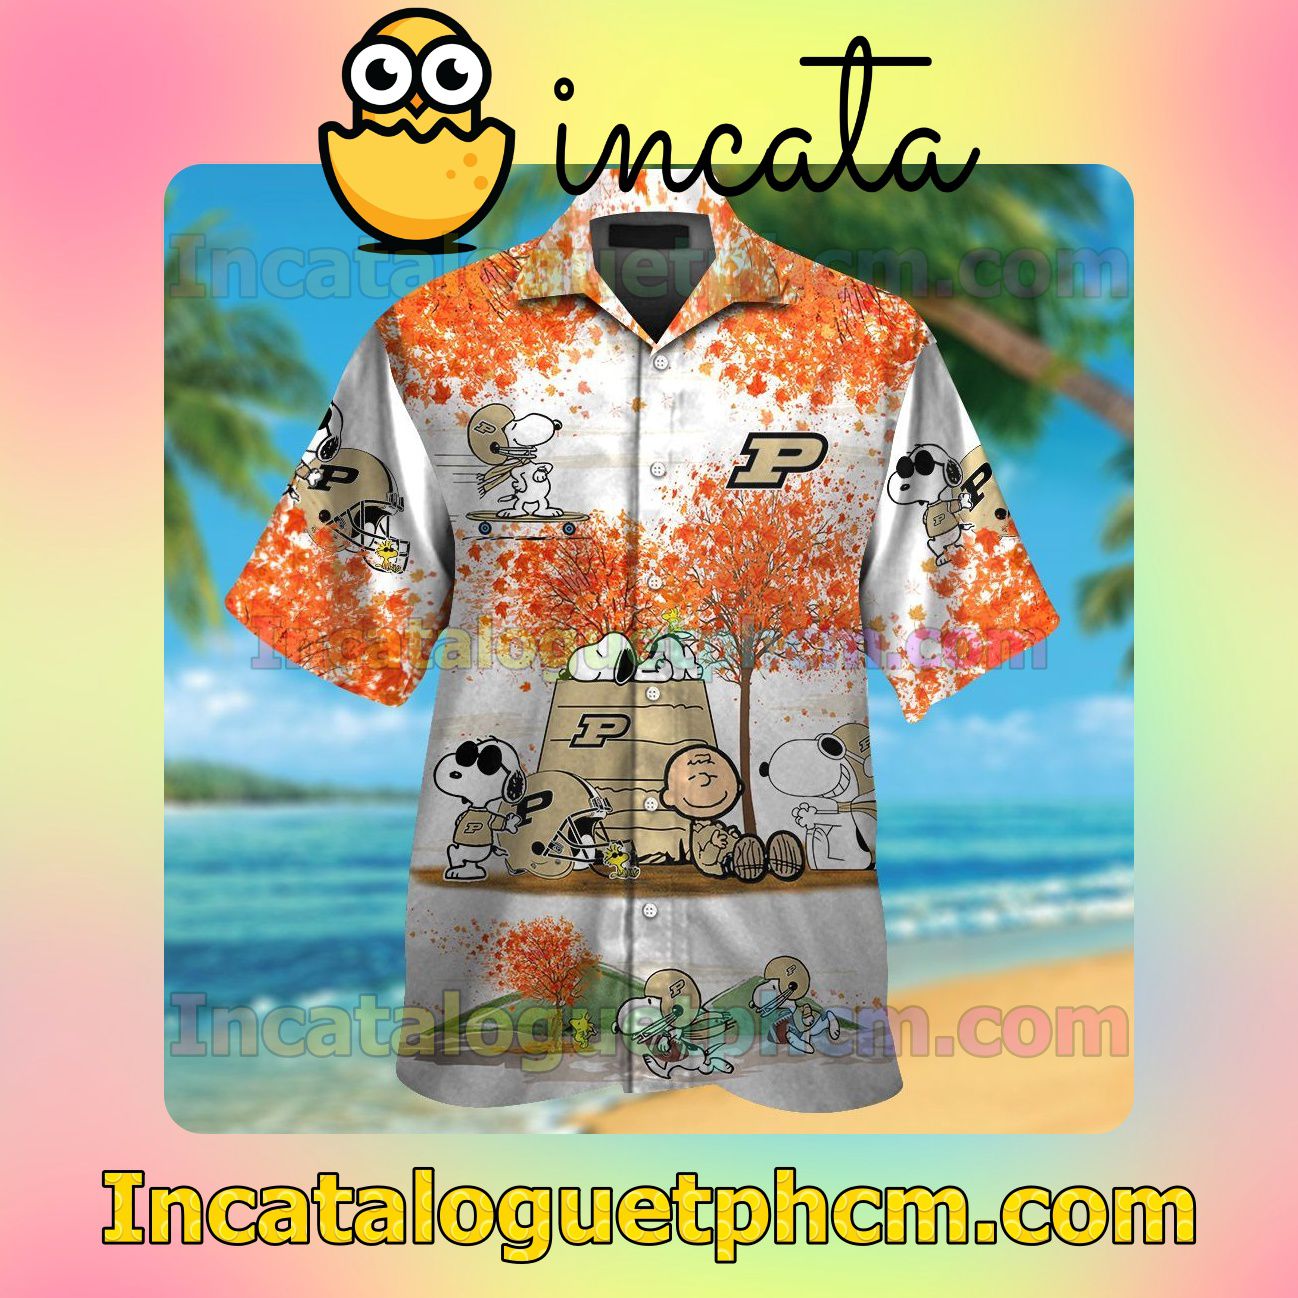 Purdue Boilermakers Snoopy Autumn Beach Vacation Shirt, Swim Shorts